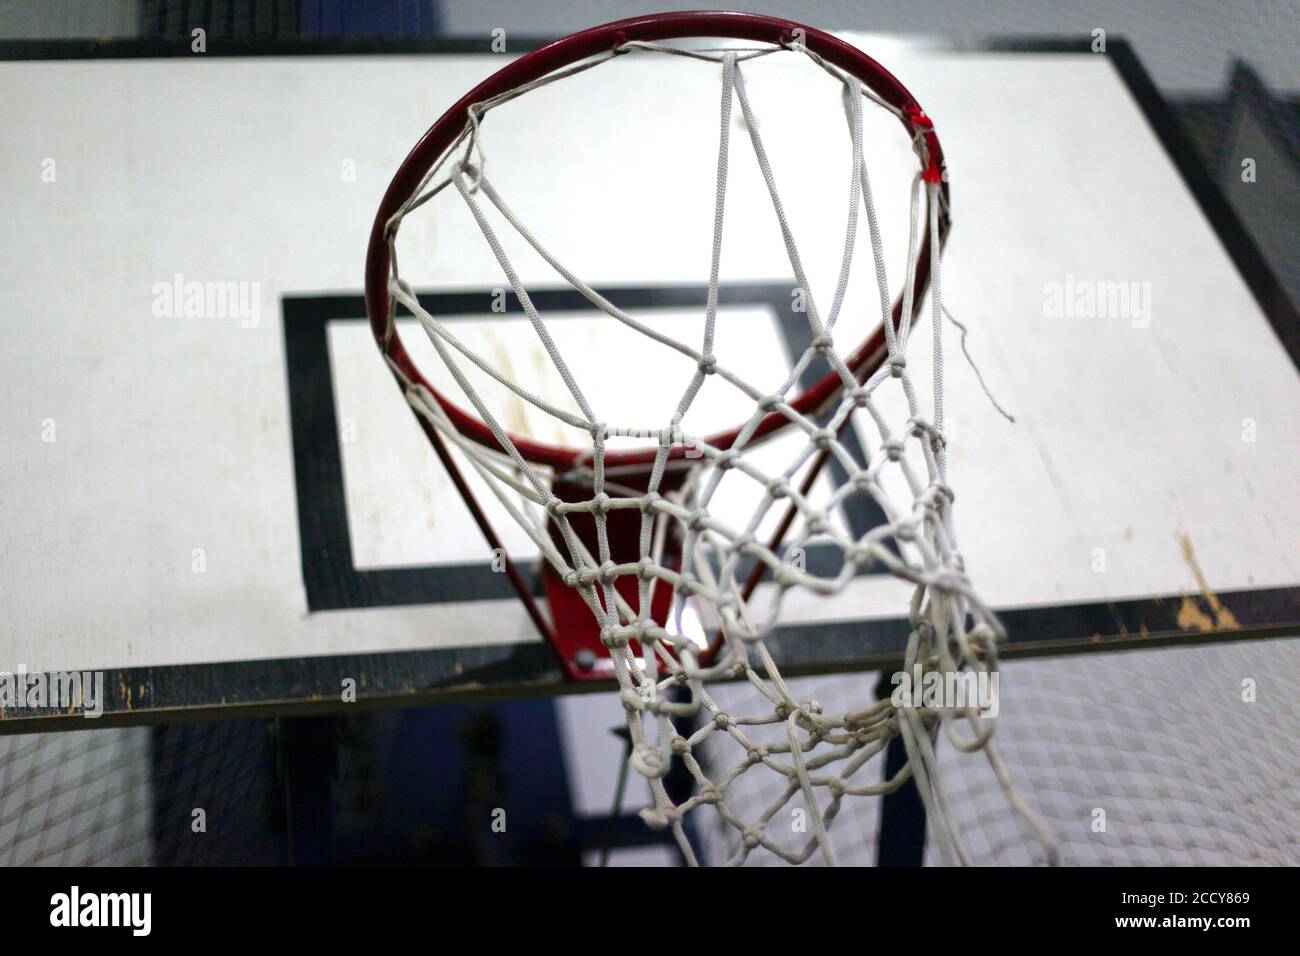 Basketball ring with a net for playing basketball indoors Stock Photo